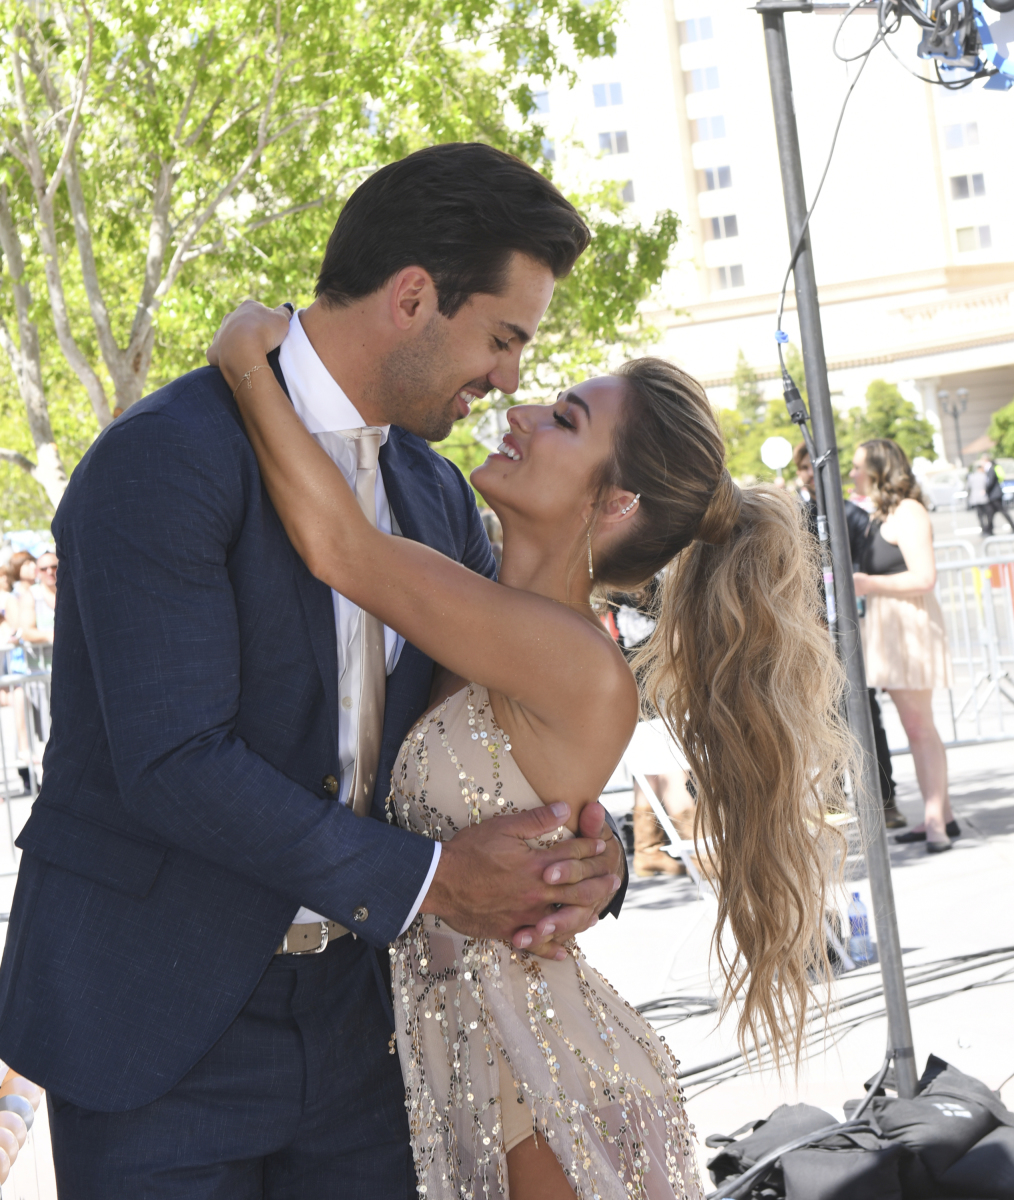 NFL player Eric Decker and wife Jessie James Decker on the red carpet for THE 52ND ACADEMY OF COUNTRY MUSIC AWARDS®, scheduled to air LIVE from T-Mobile Arena in Las Vegas Sunday, April 2 (live 8:00-11:00 PM, ET/delayed PT) on the CBS Television Network. Photo: Michele Crowe/CBS ©2017 CBS Broadcasting, Inc. All Rights Reserved